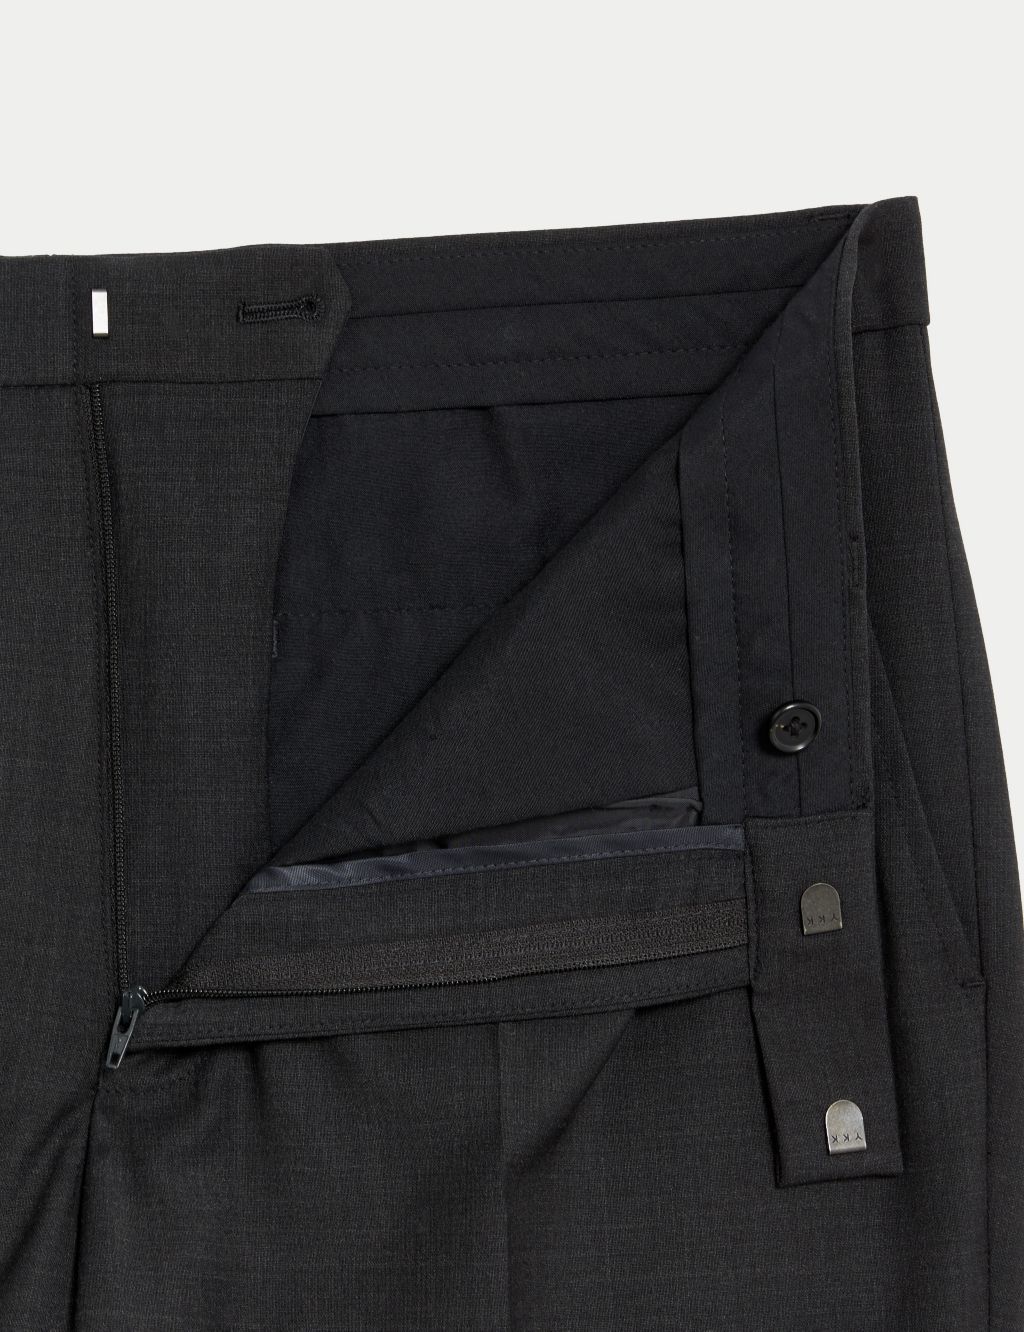 The Ultimate Tailored Fit Suit Trousers image 2